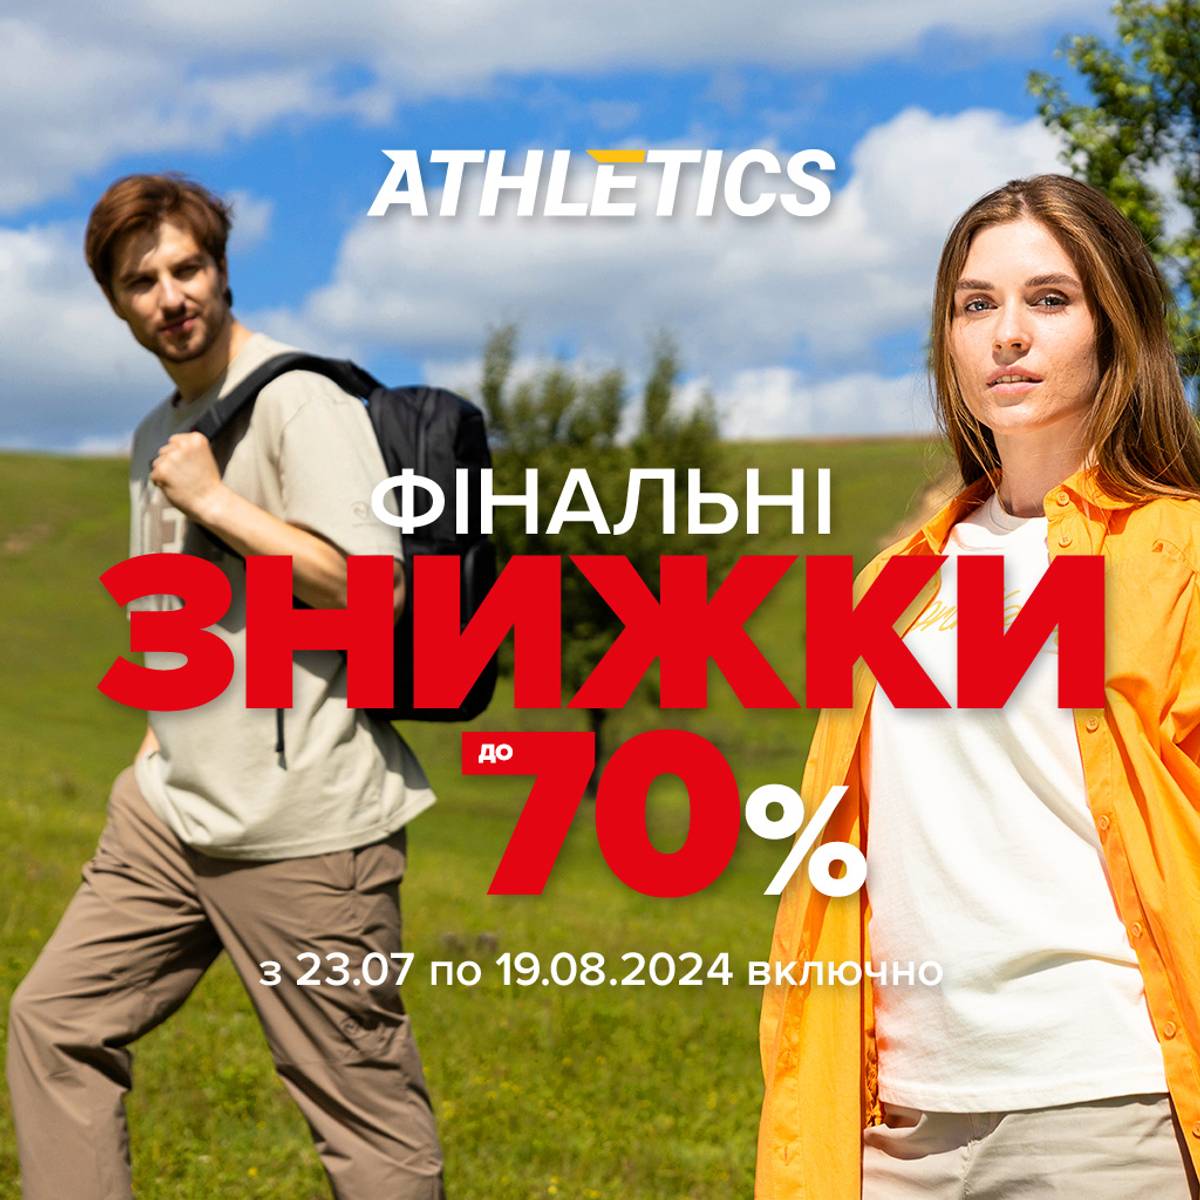 Final discounts up to 70%!